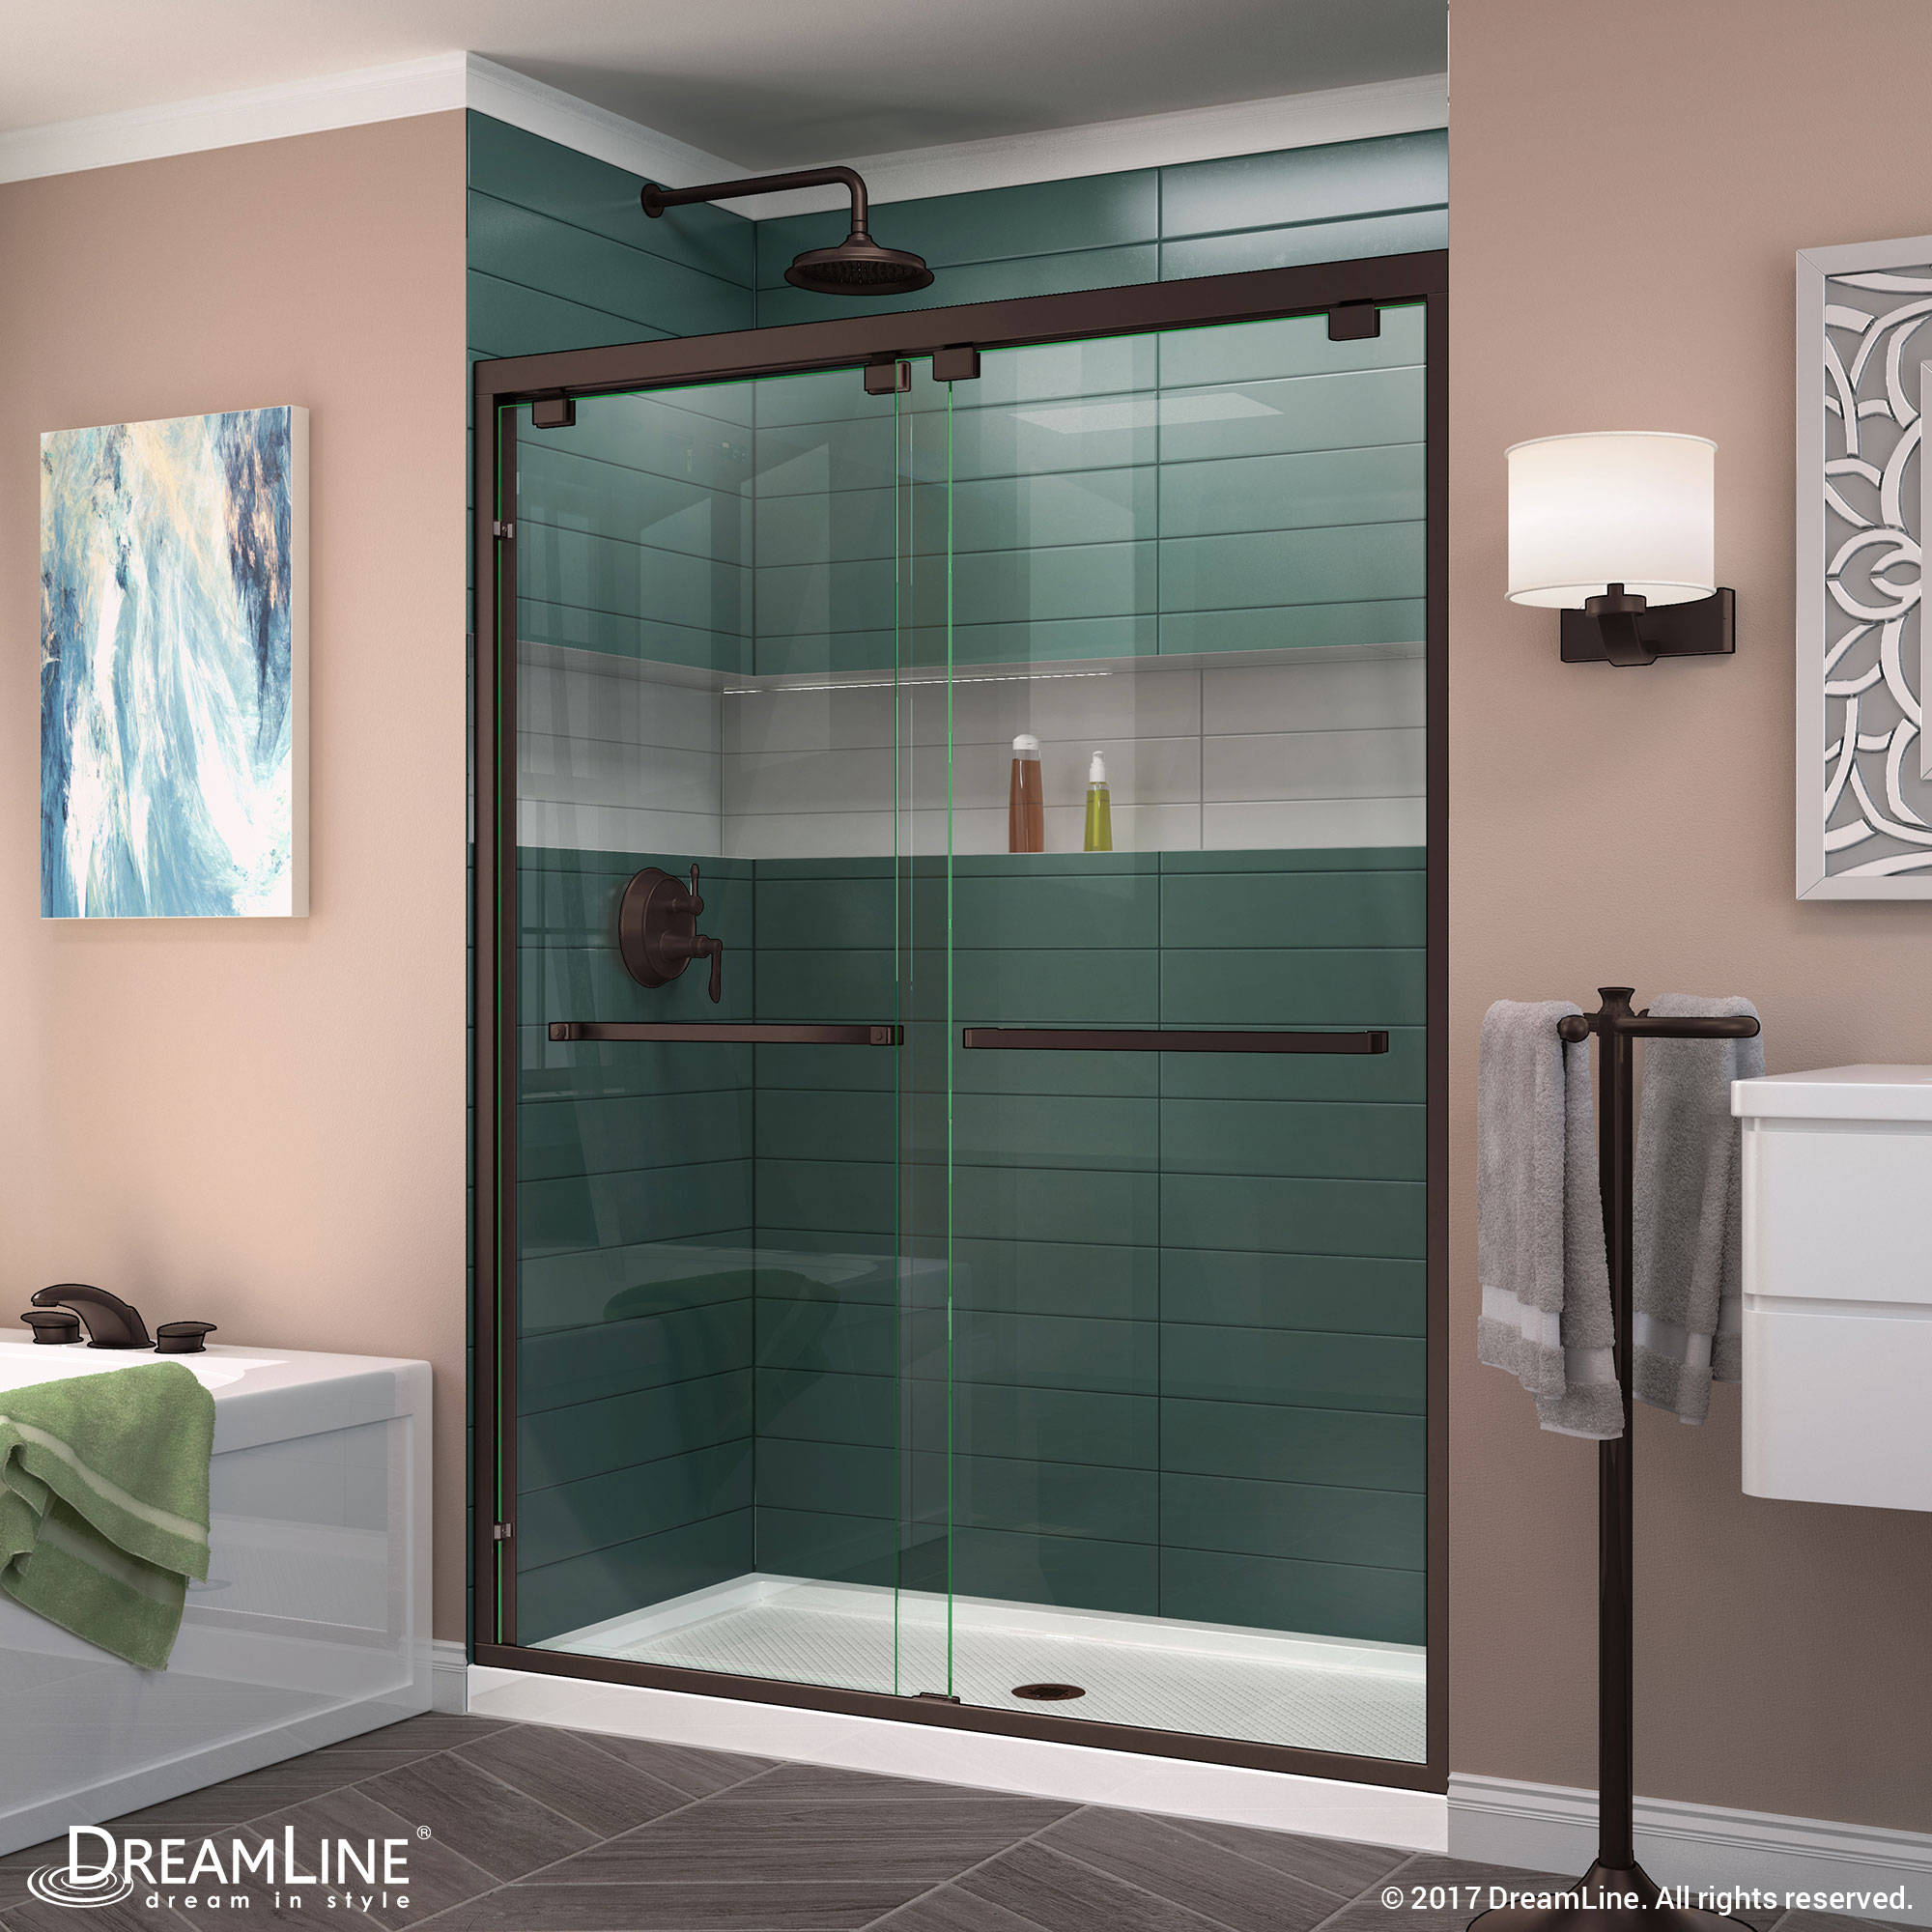 DreamLine Encore 32 in. D x 54 in. W x 78 3/4 in. H Bypass Shower Door in Brushed Nickel and Center Drain White Base Kit